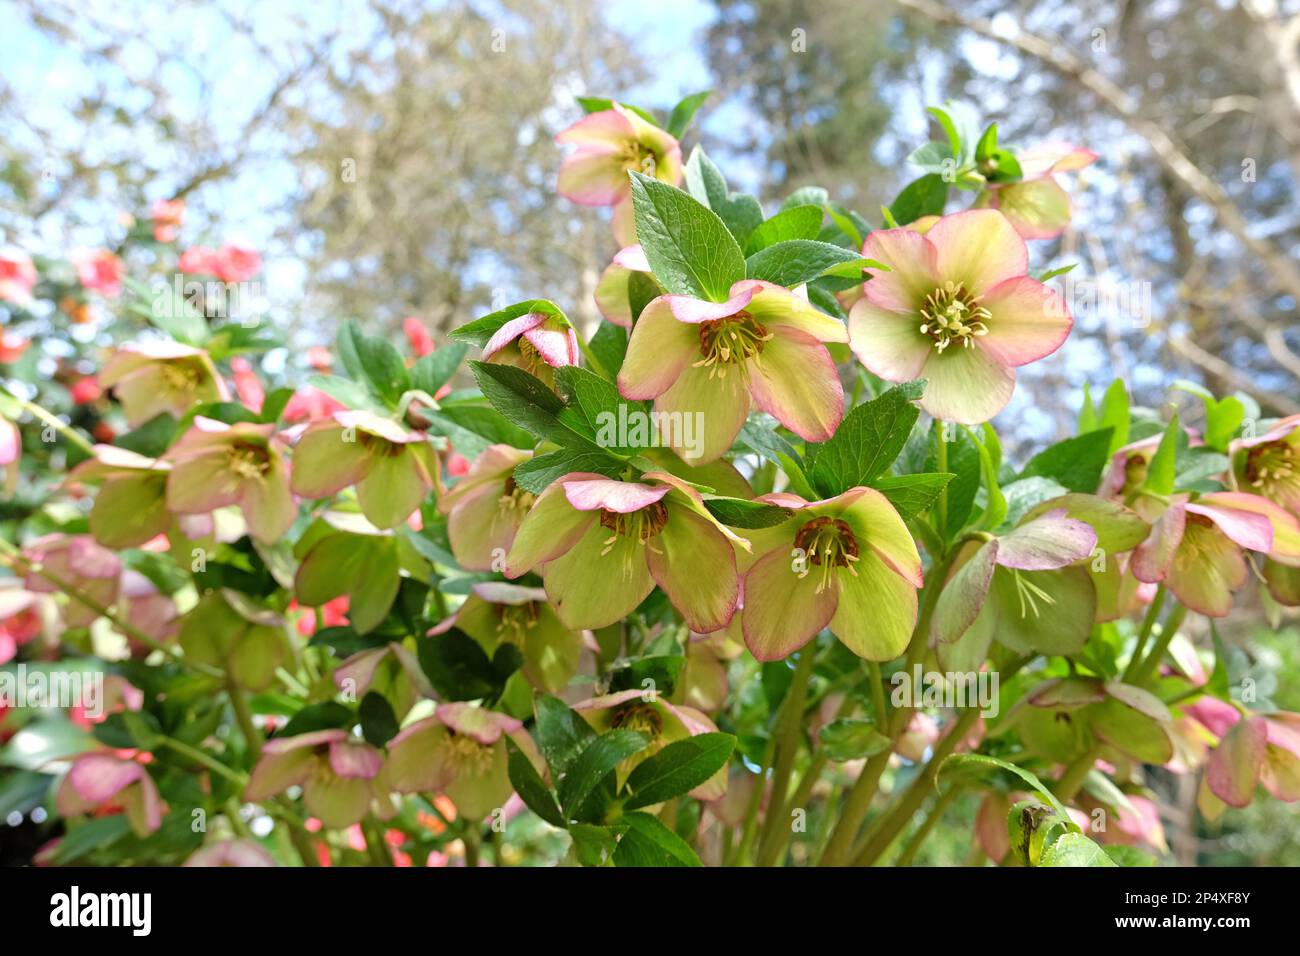 Cream and pink tinged Hellebores, or lenten rose, in flower Stock Photo